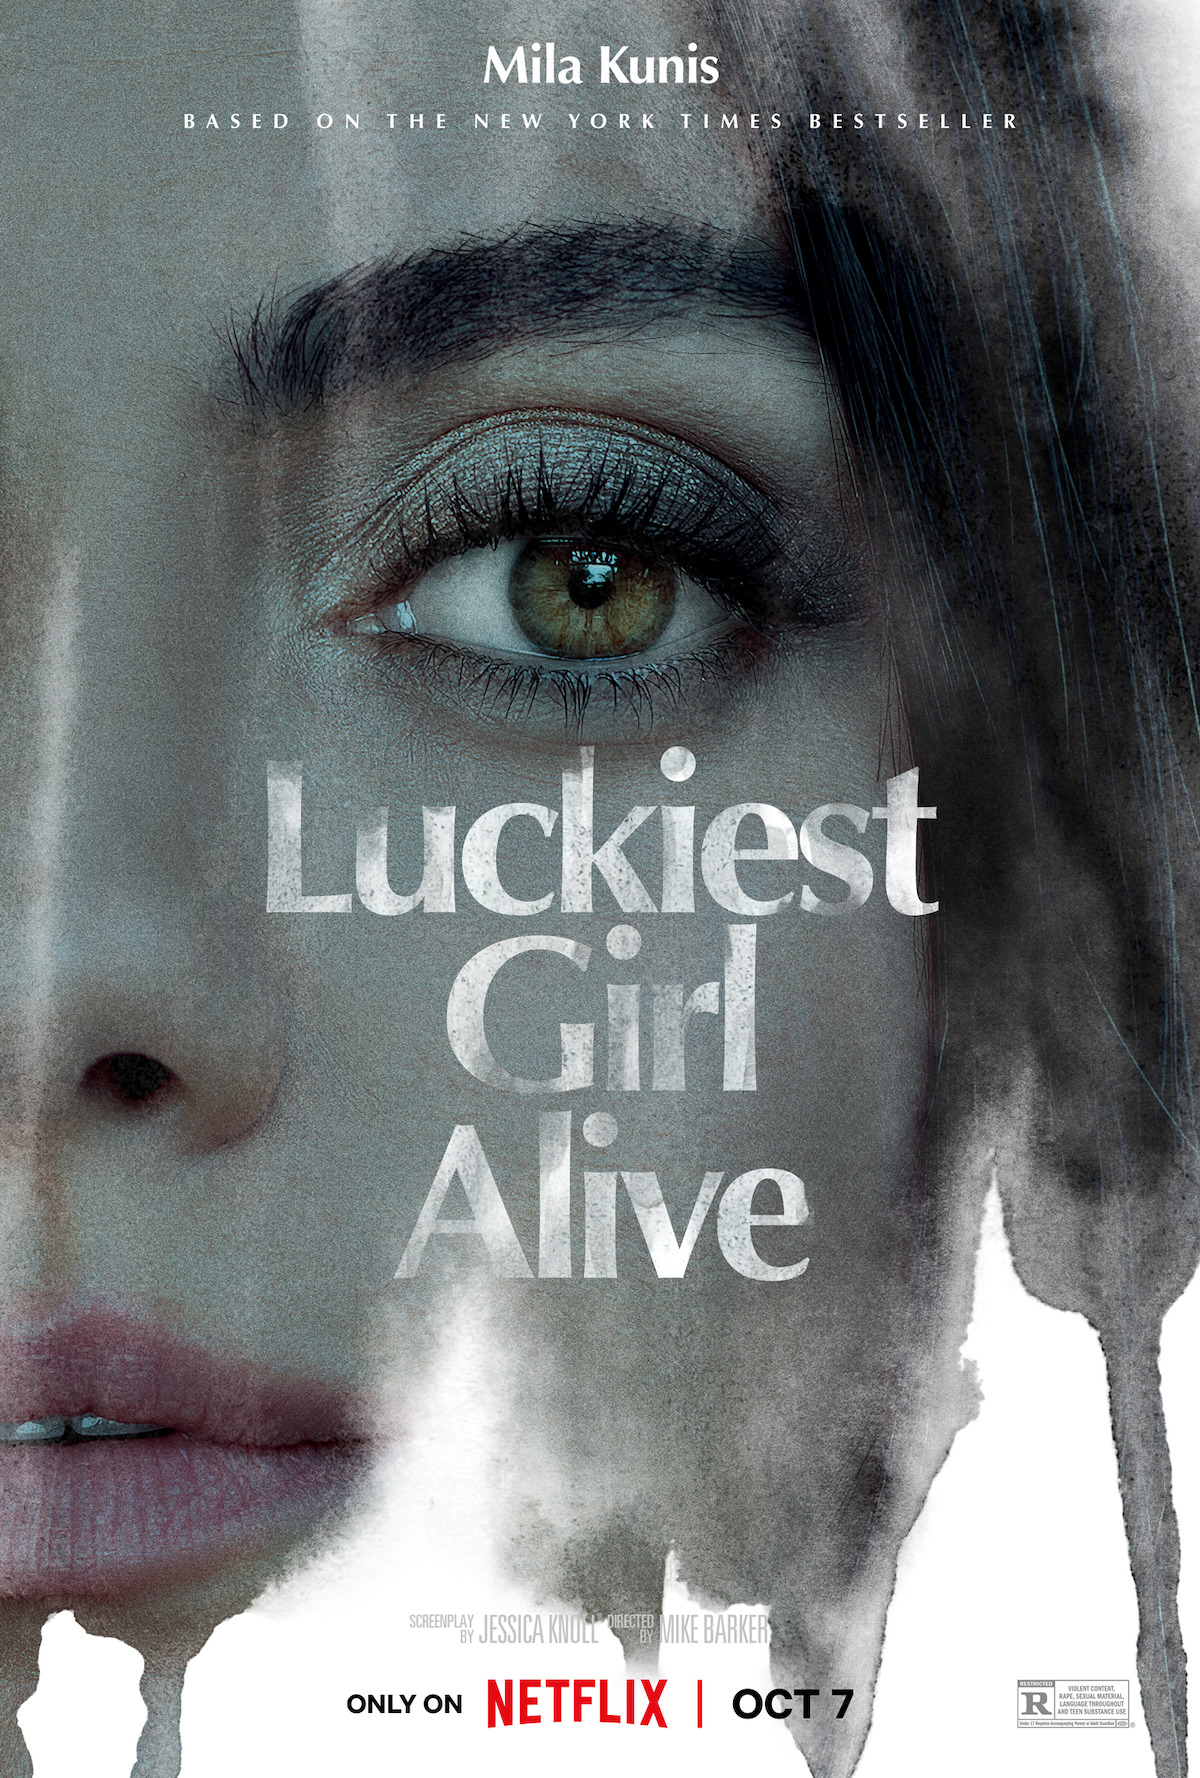 Luckiest Girl Alive Trailer and First Look Photos Dropped image